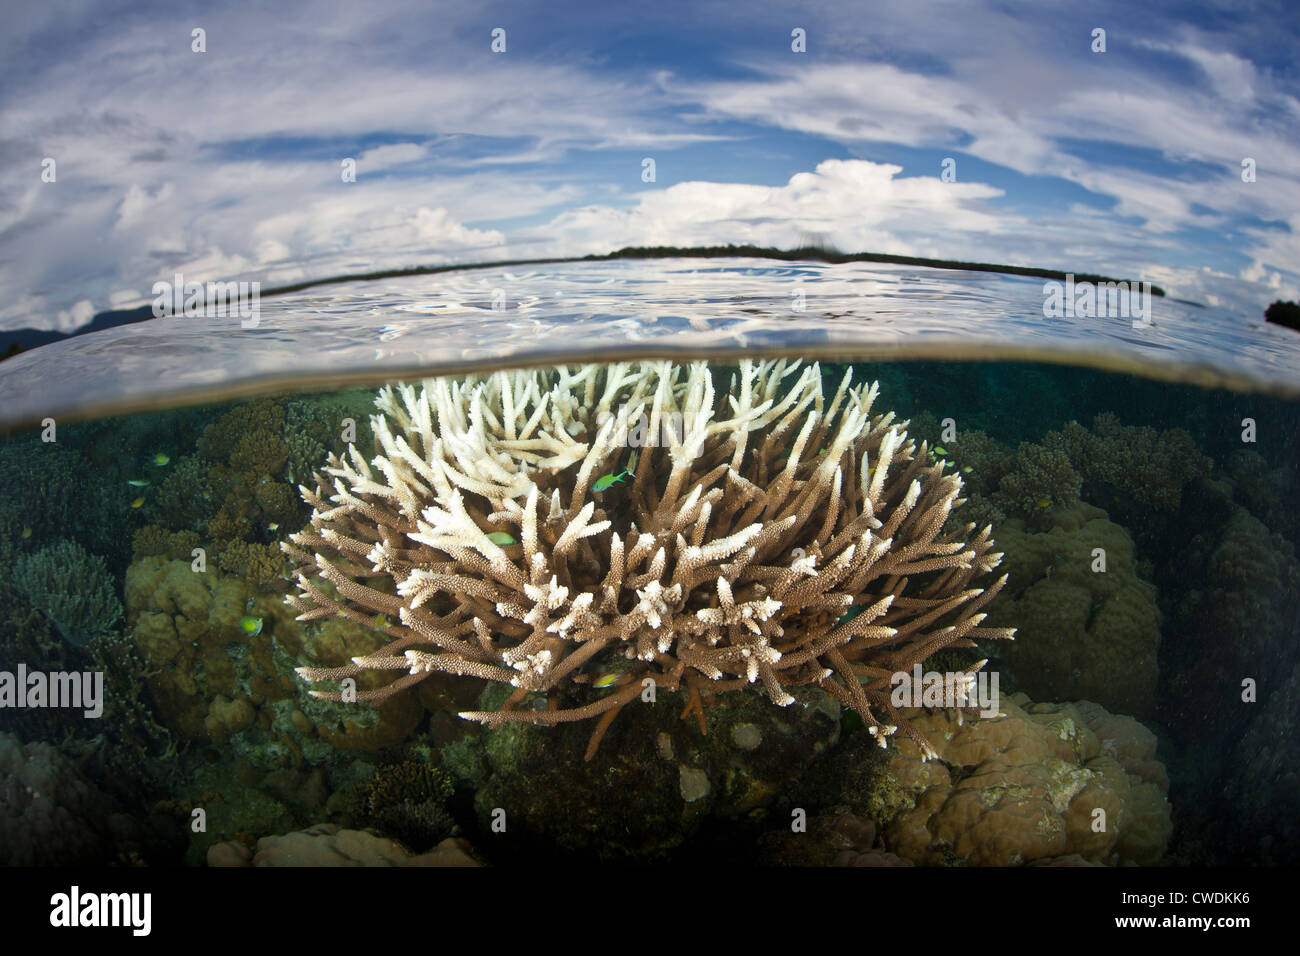 A staghorn coral colony, Acropora sp., shows signs of bleaching. The white tips of the coral are due to severe low tides. Stock Photo